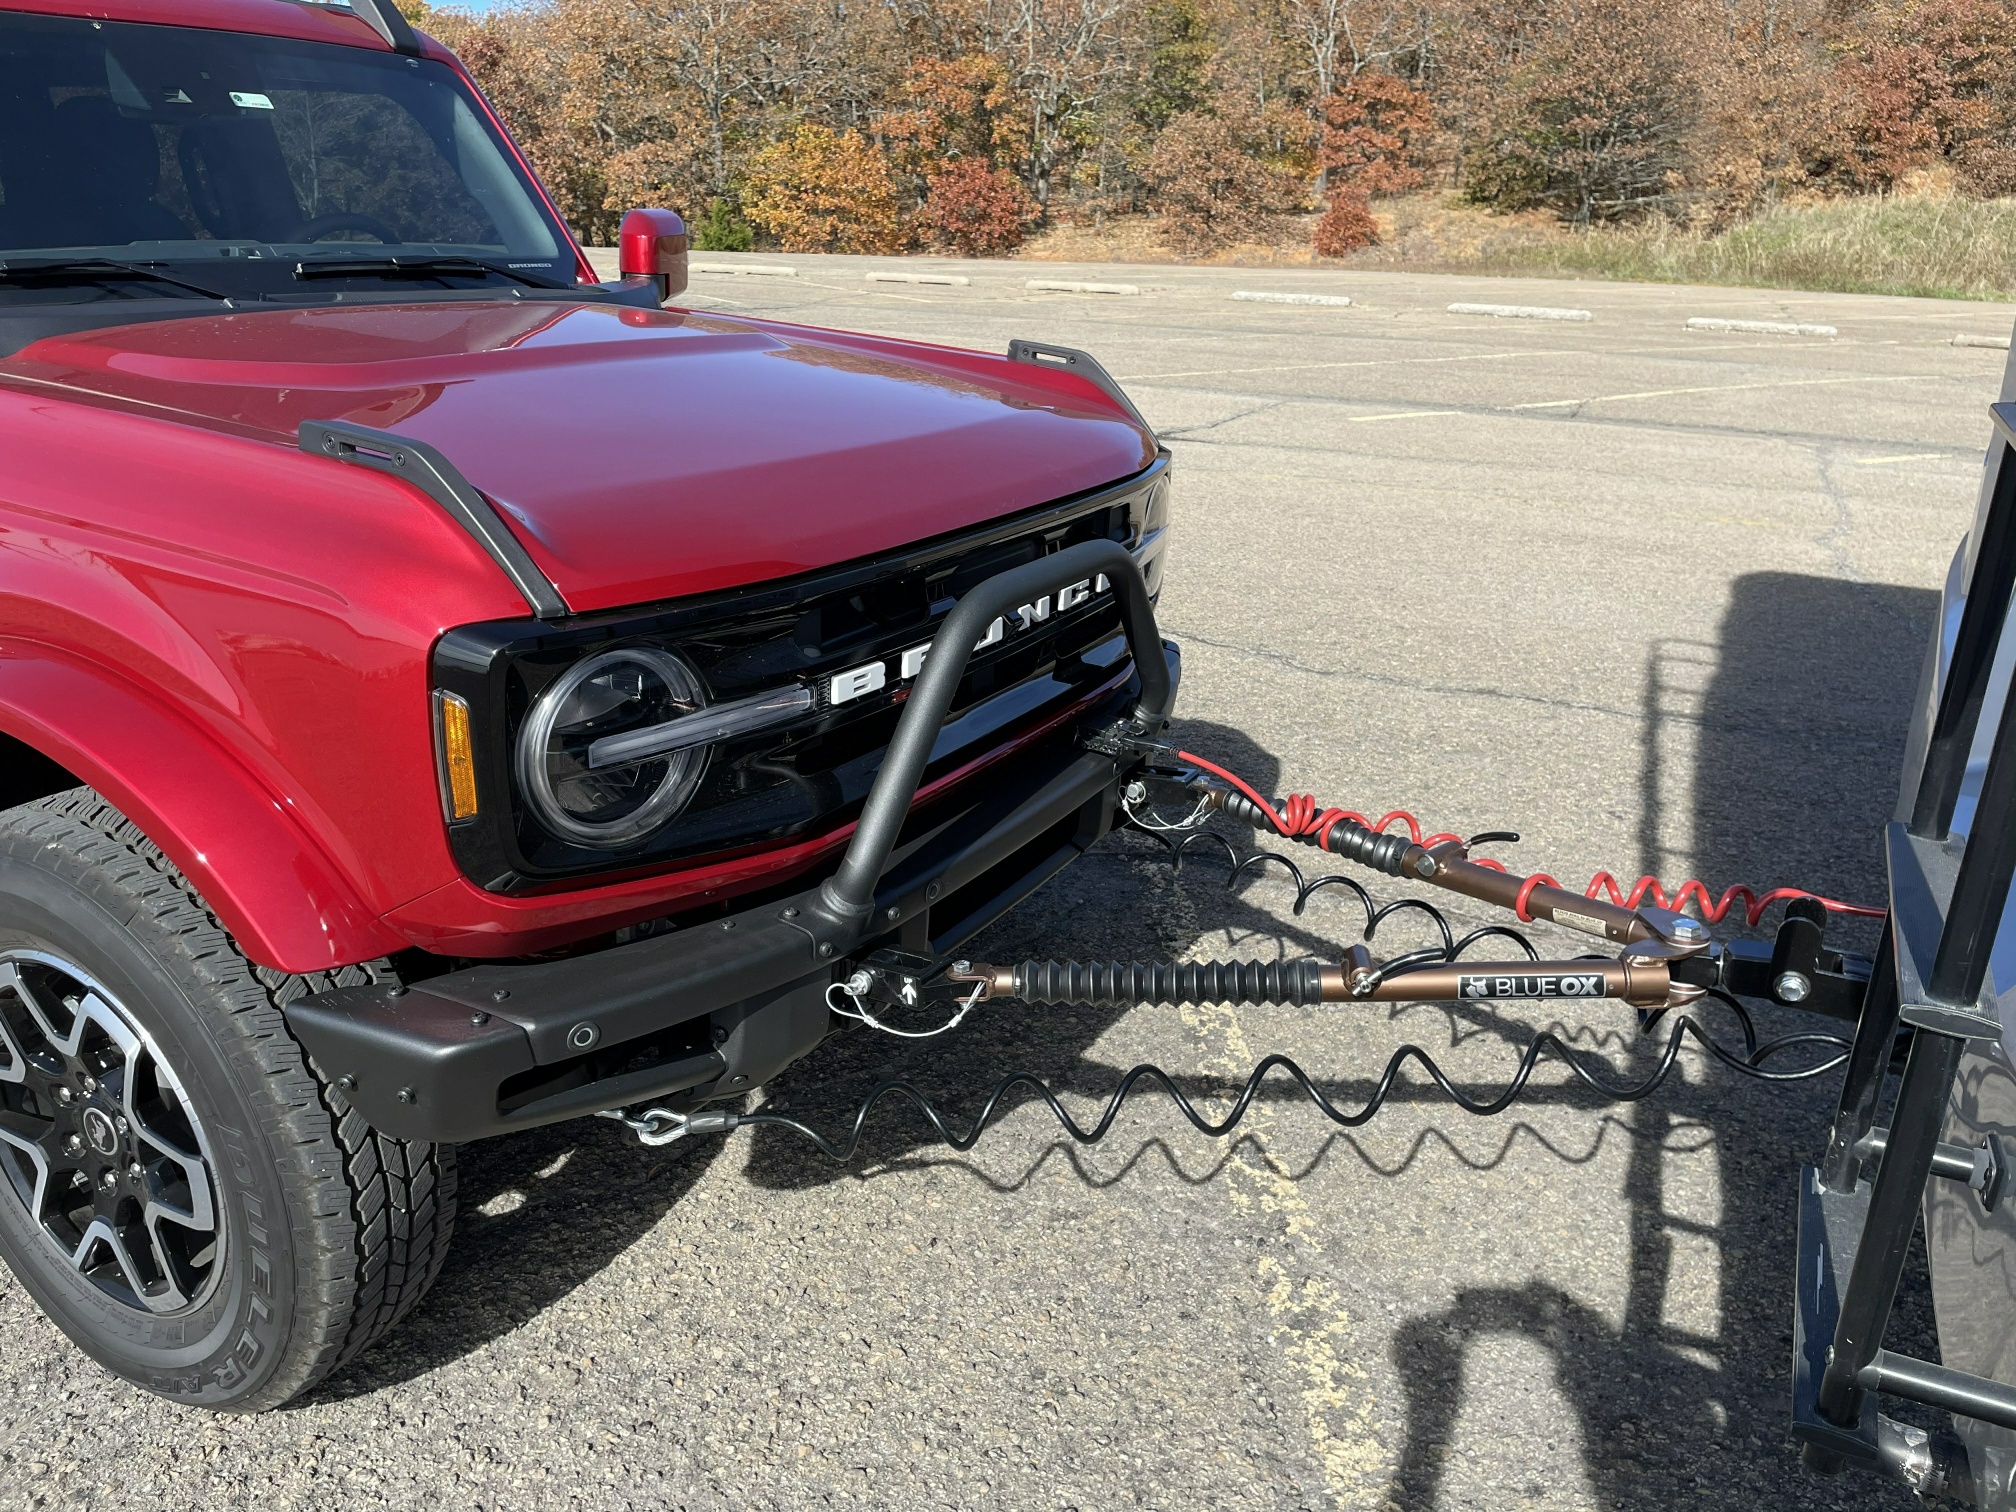 Ford Bronco Flat tow equipment needed to flat tow the 2021 Bronco? IMG_4827